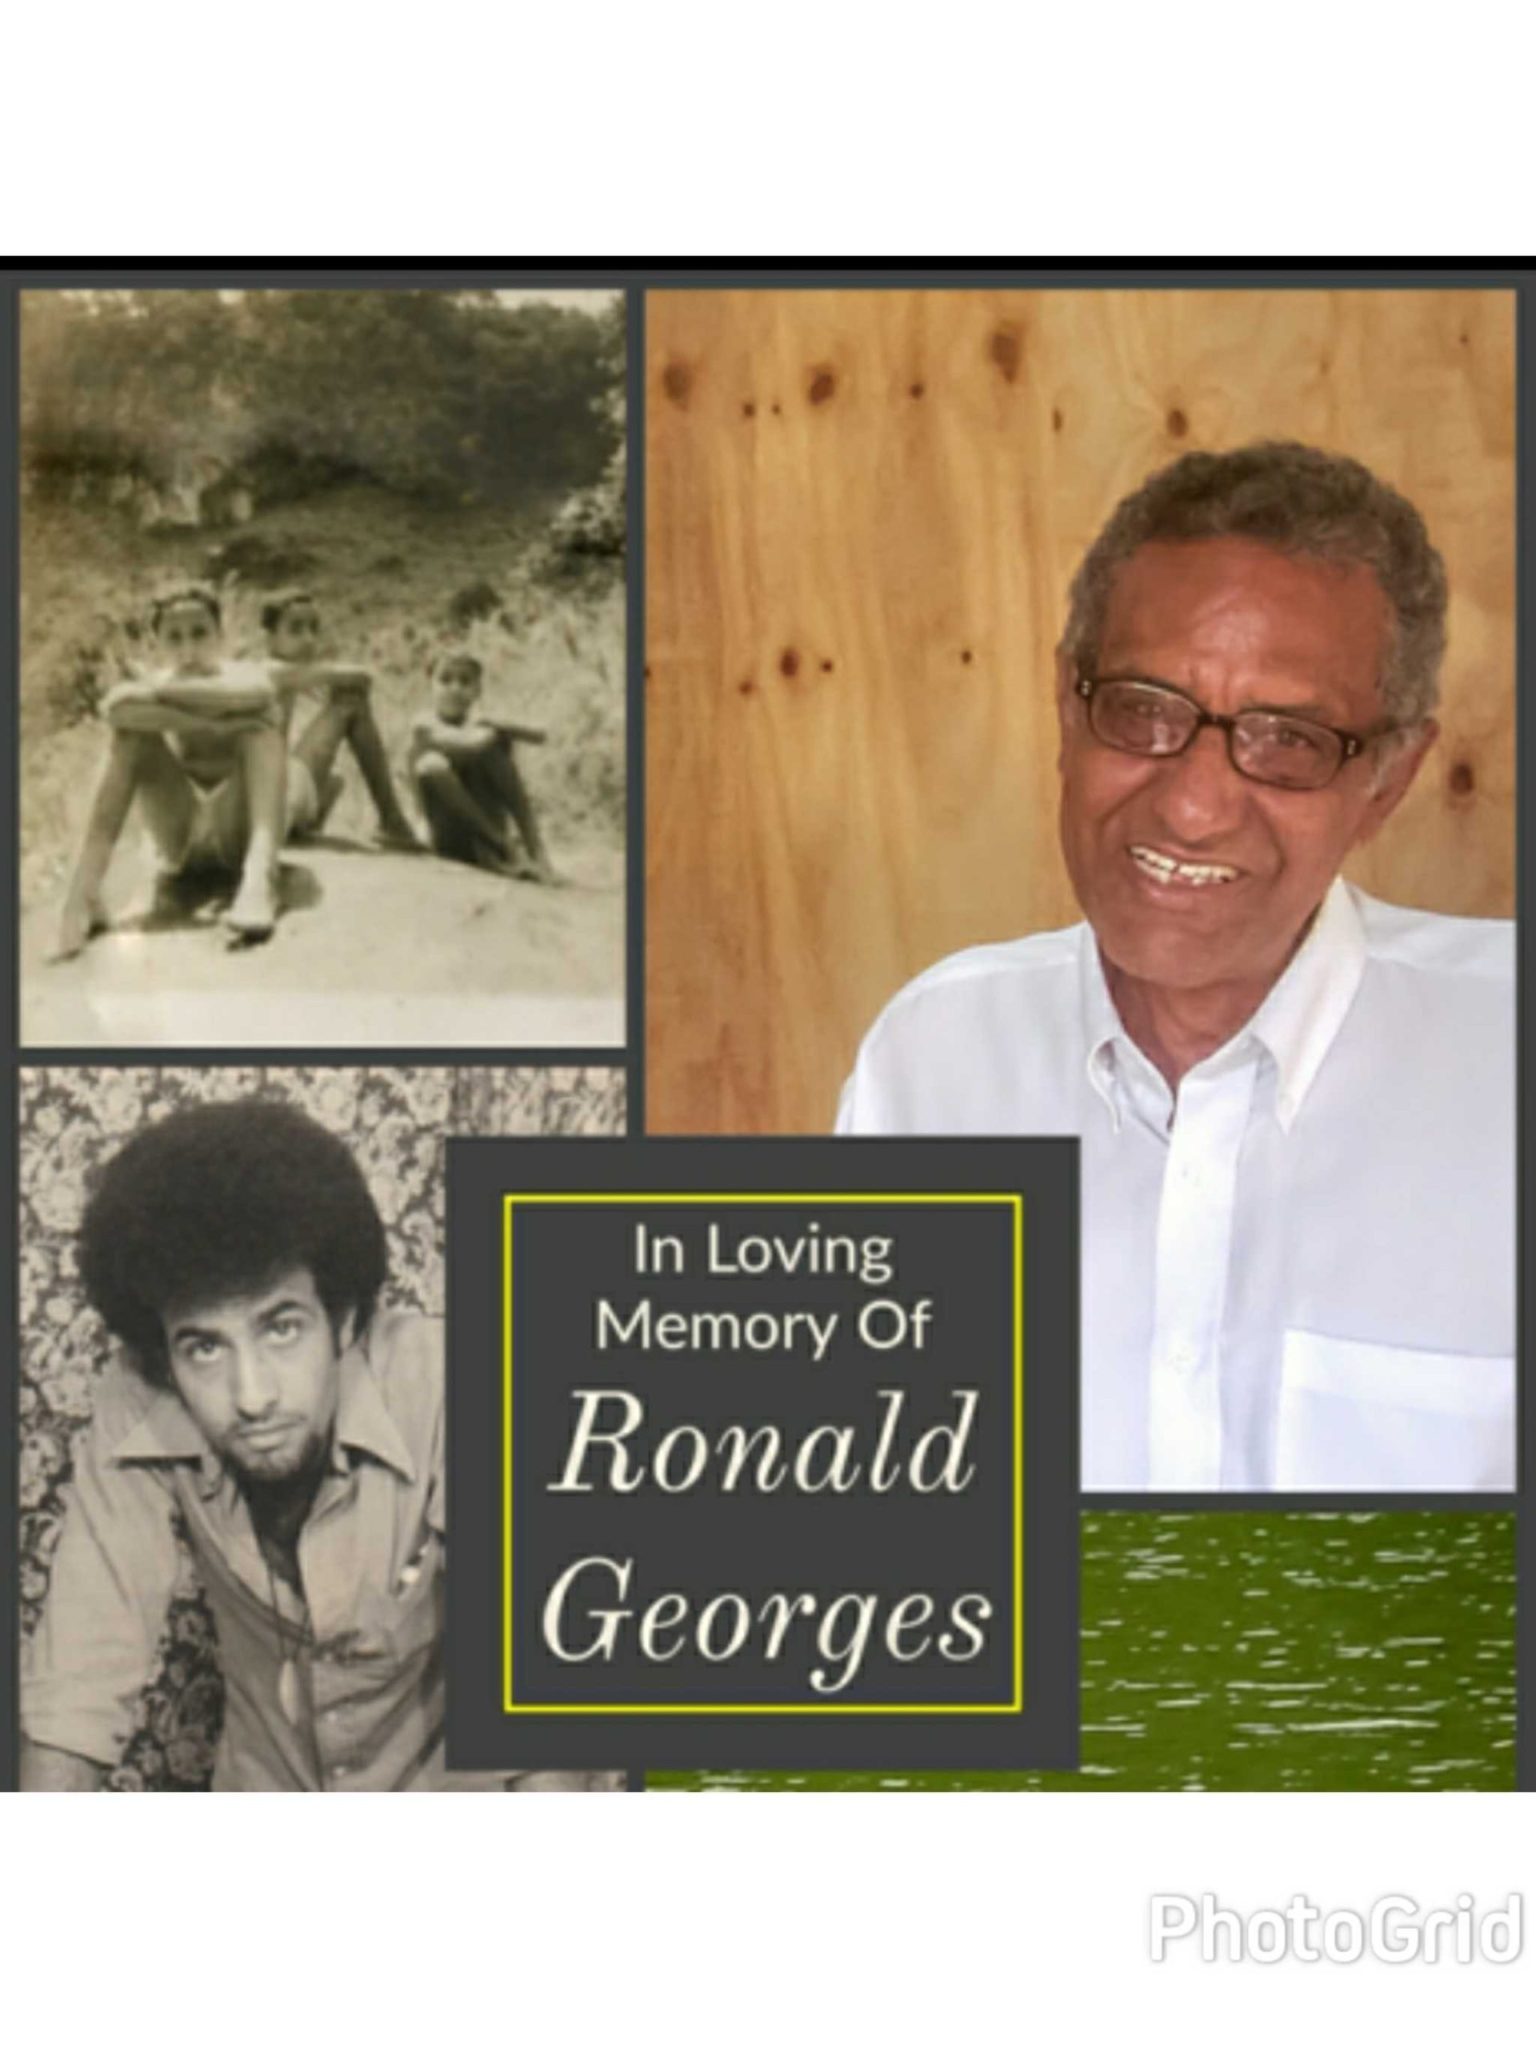 Death announcement of 68 year old Ronald “Bofo” Georges of Marigot